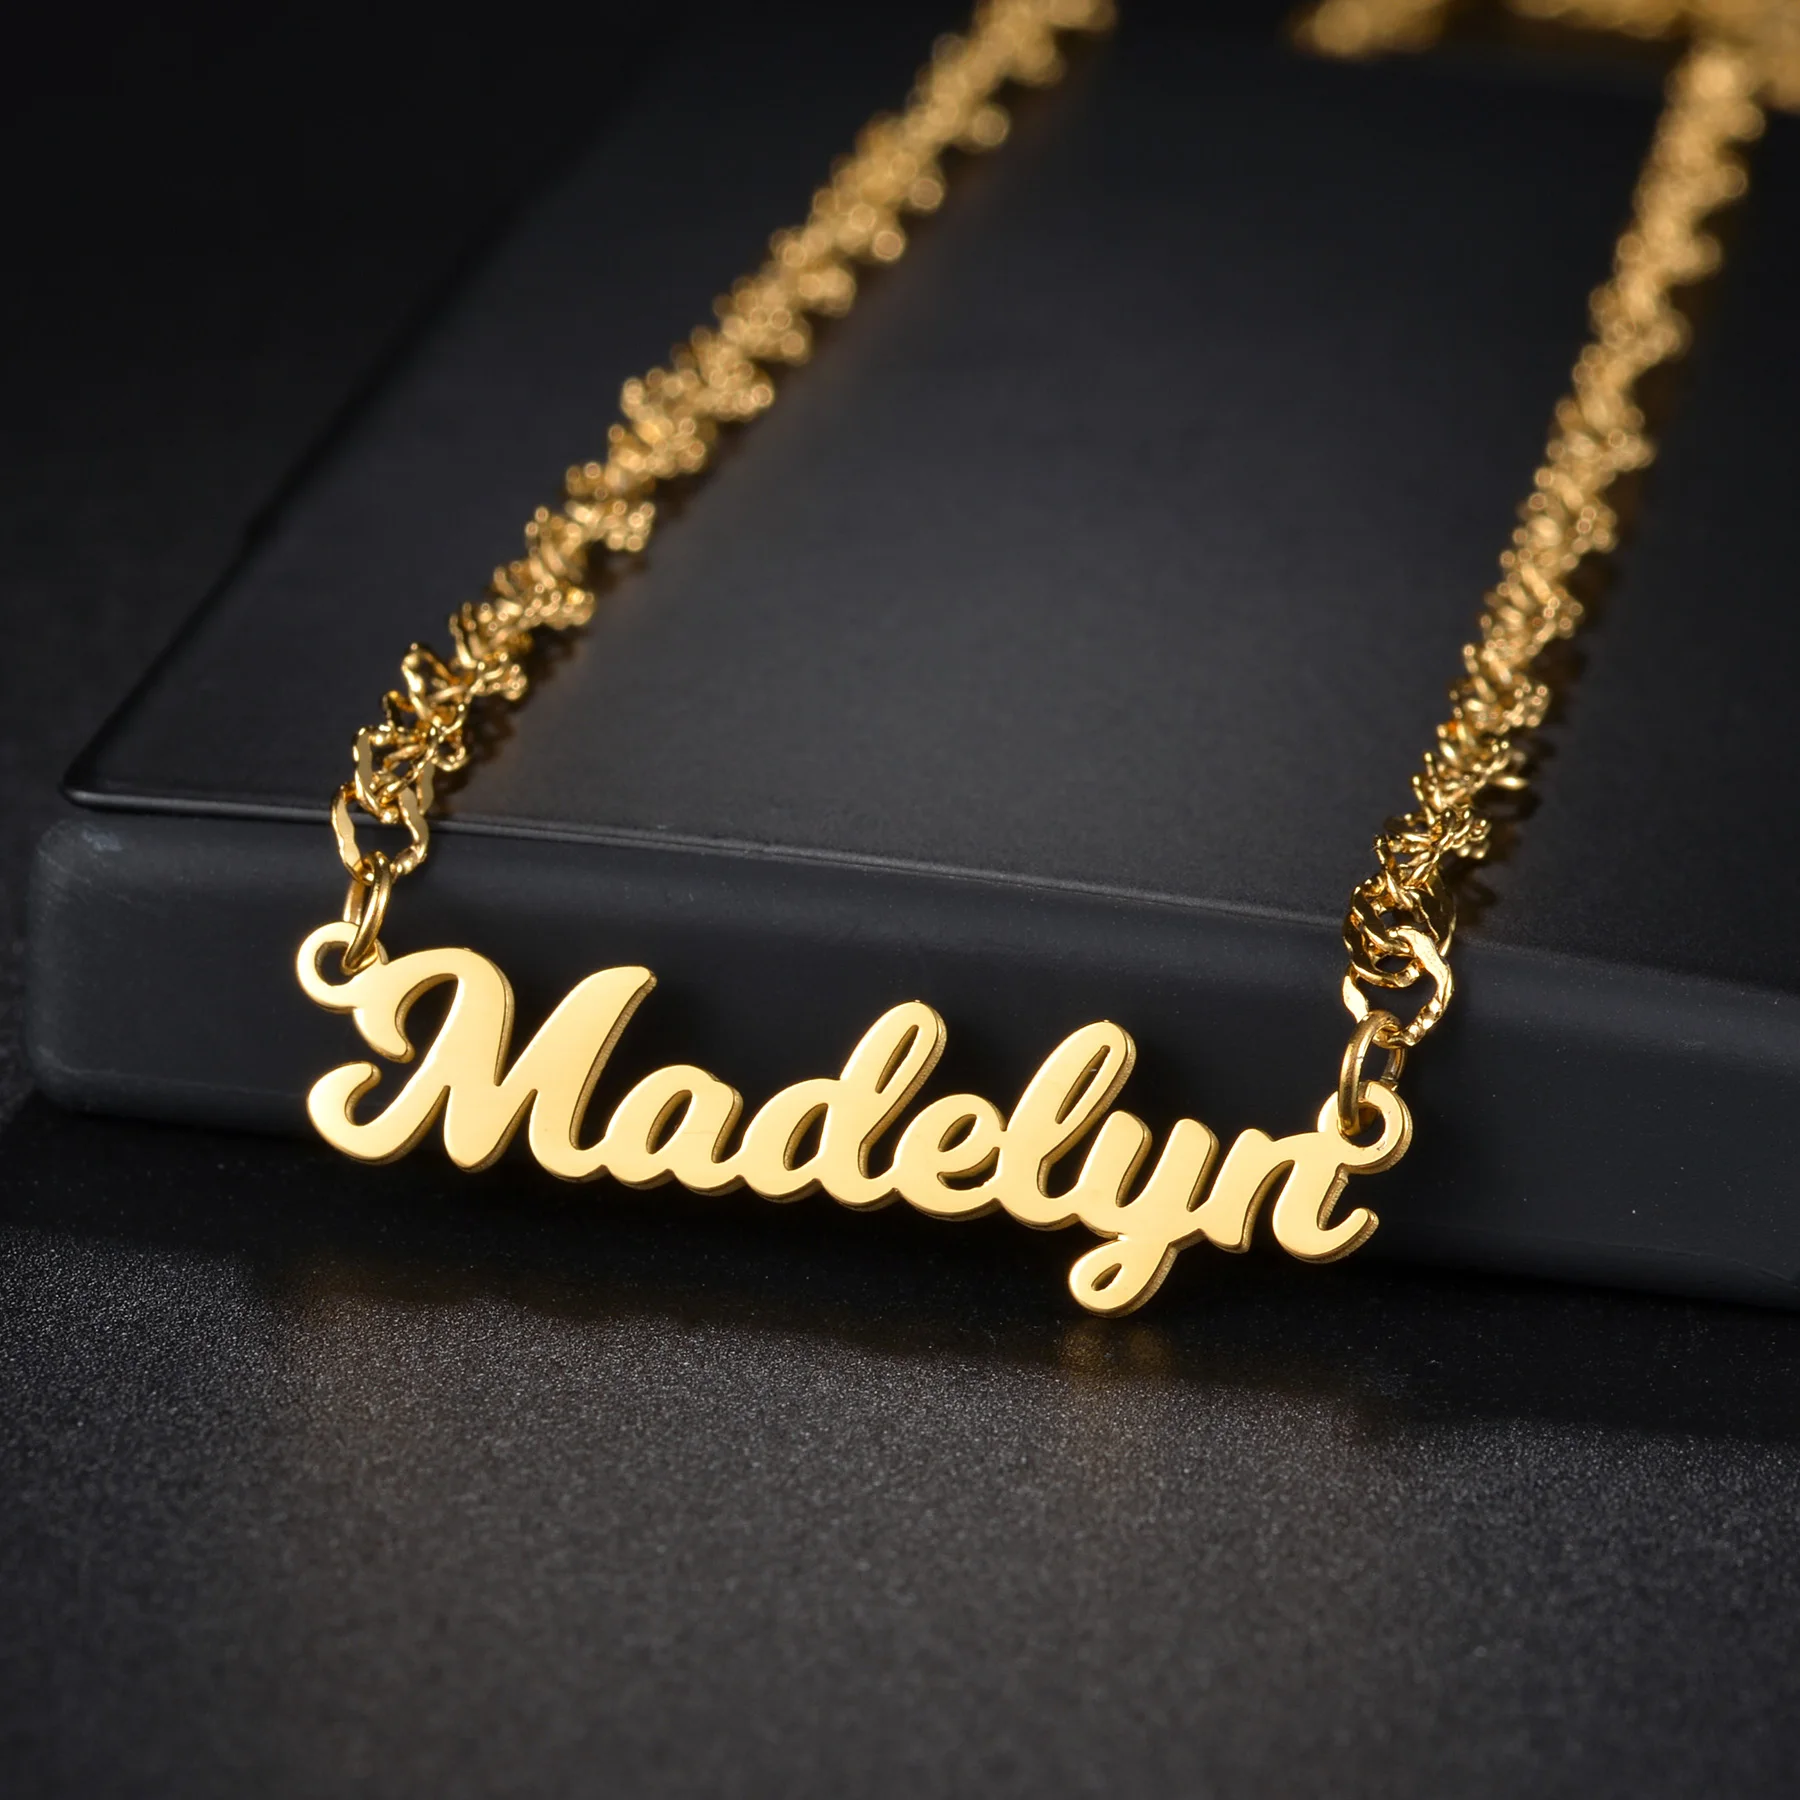 Atoztide Personalized Custom Name Necklaces for Women Stainless Steel Wave Chain Letter Nameplate Pendant Birthday Jewelry Gift